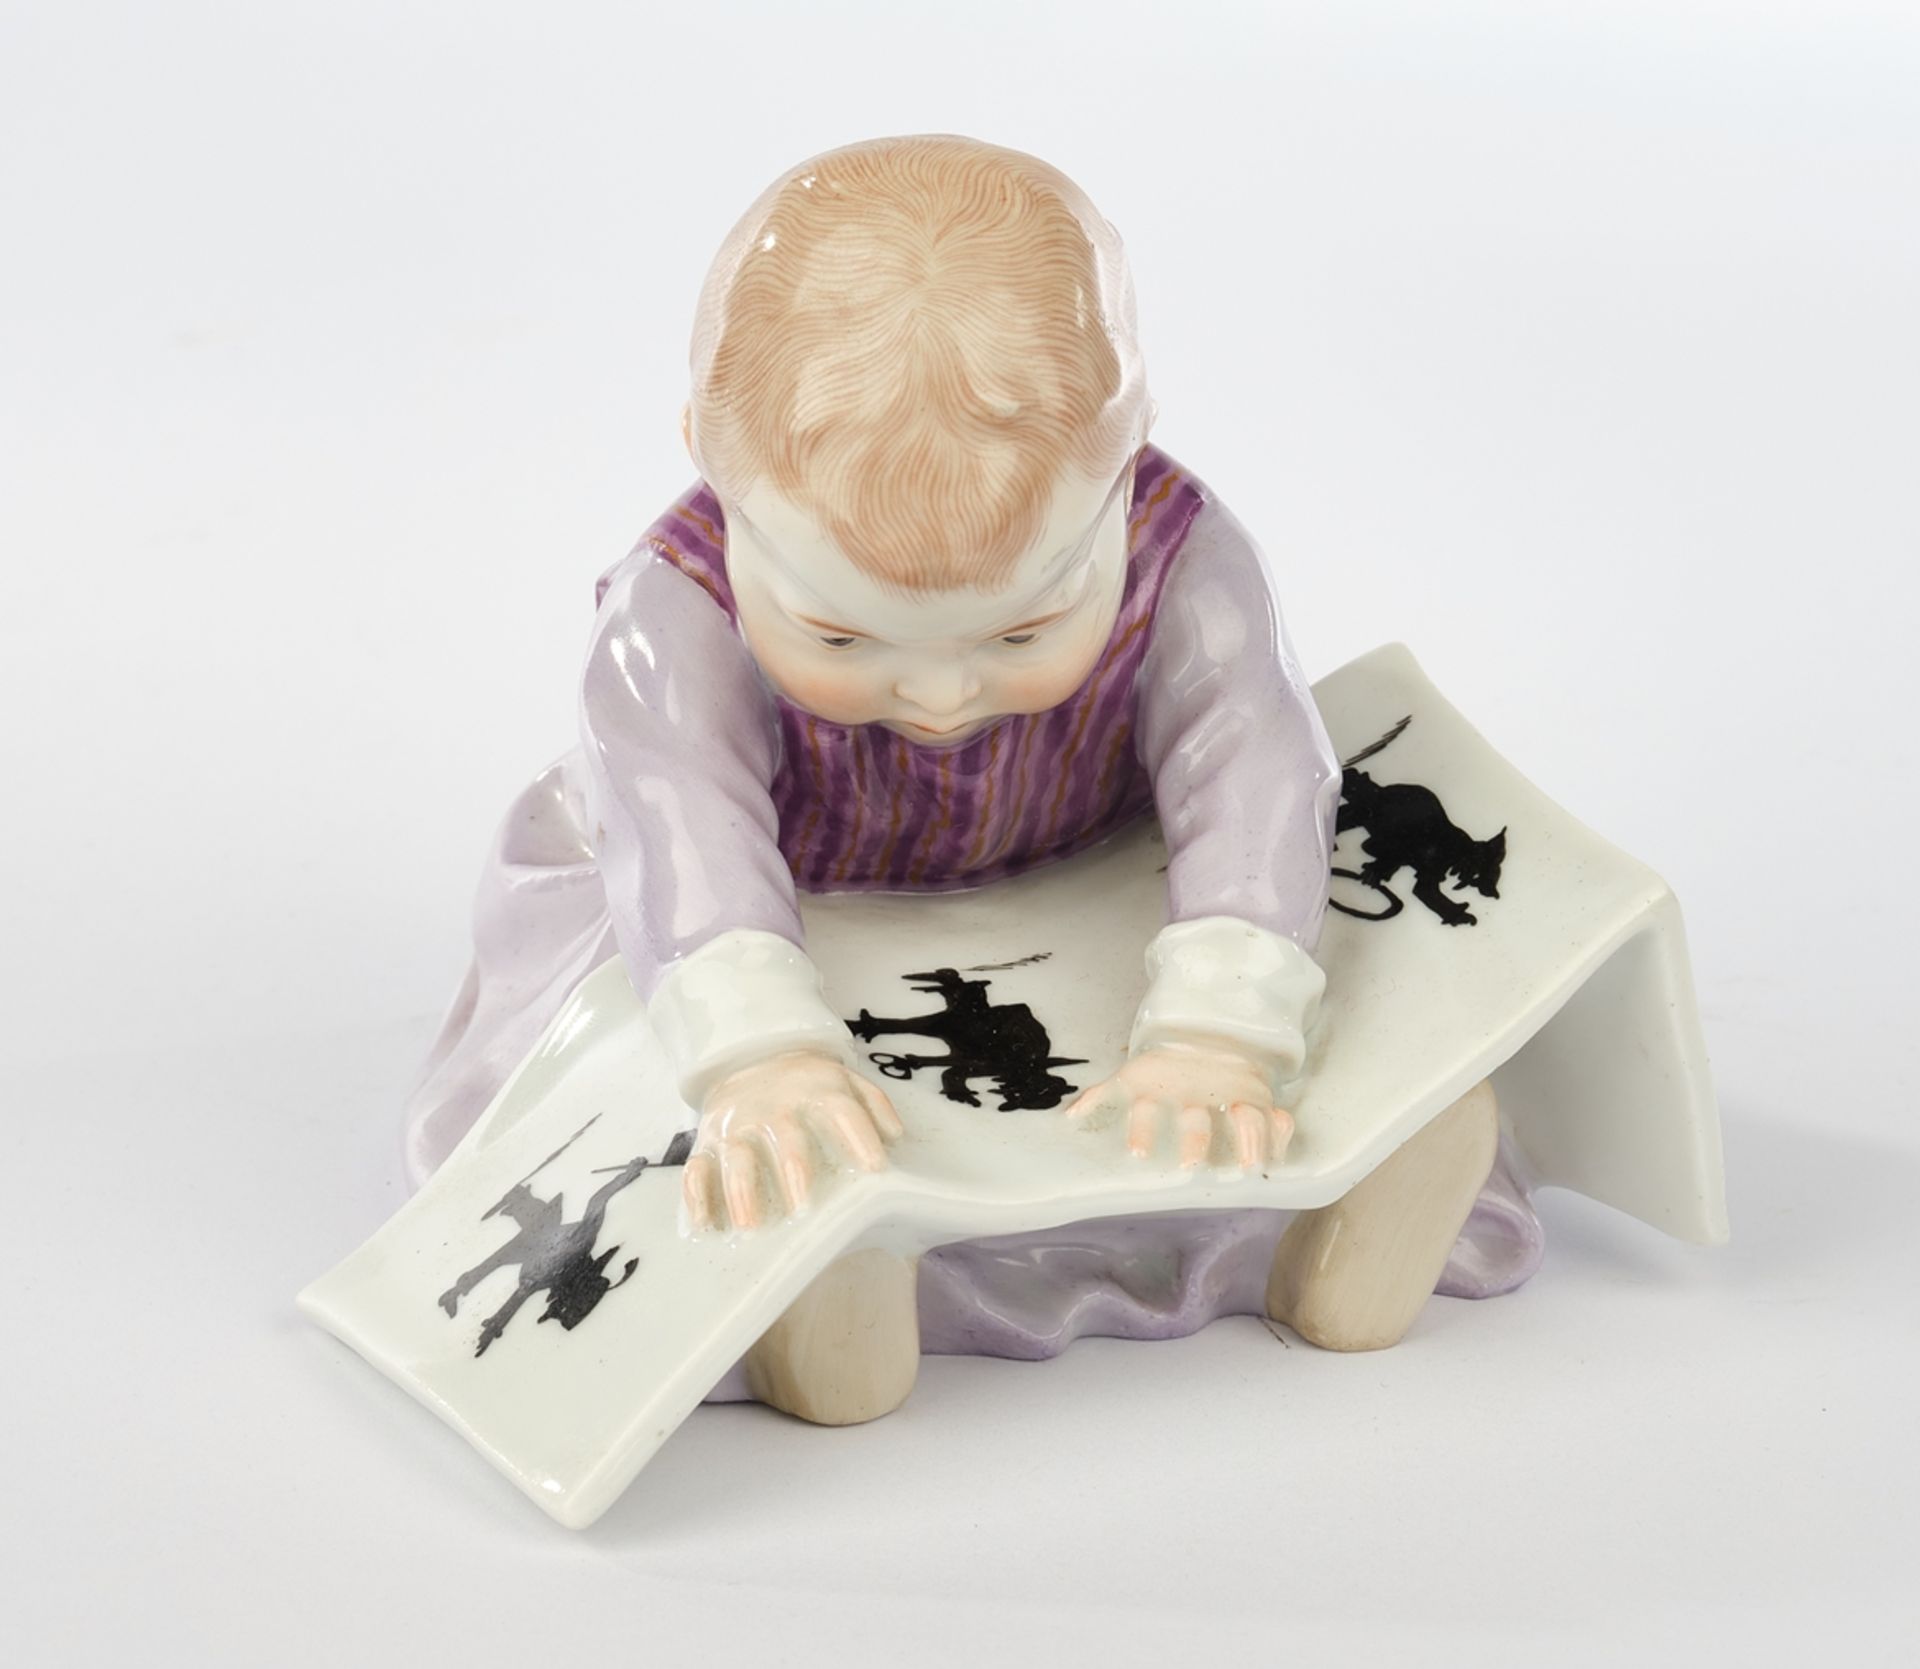 Porcelain figurine, , "Child with picture book, large", Meissen, sword mark, 1904-1924, 1st choice, - Image 2 of 5